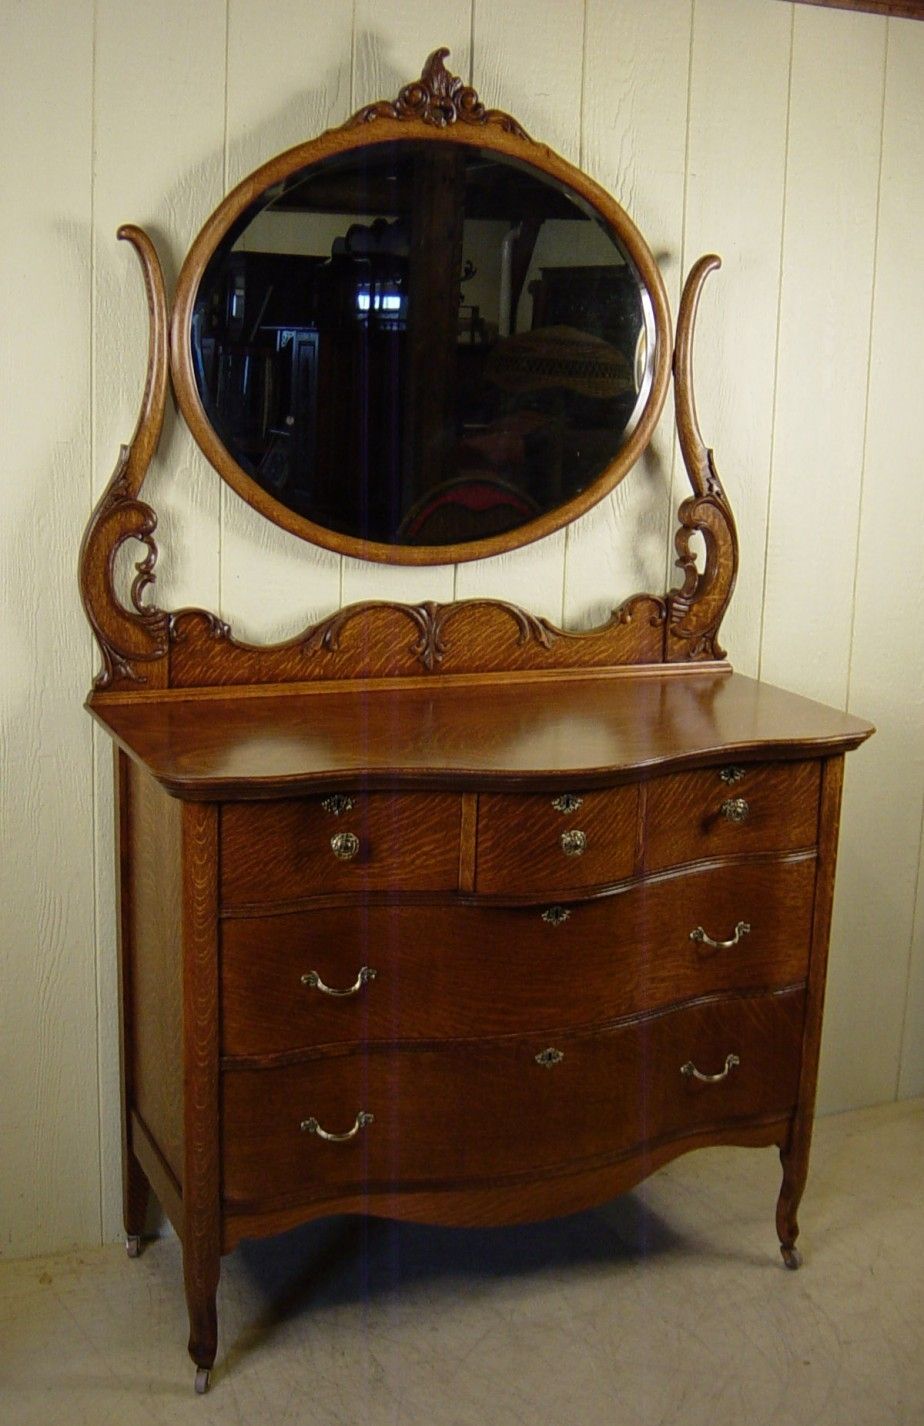 Furniture Fascinating Furniture For Bedroom Decoration With Dark Regarding Antique Small Mirrors (View 15 of 15)